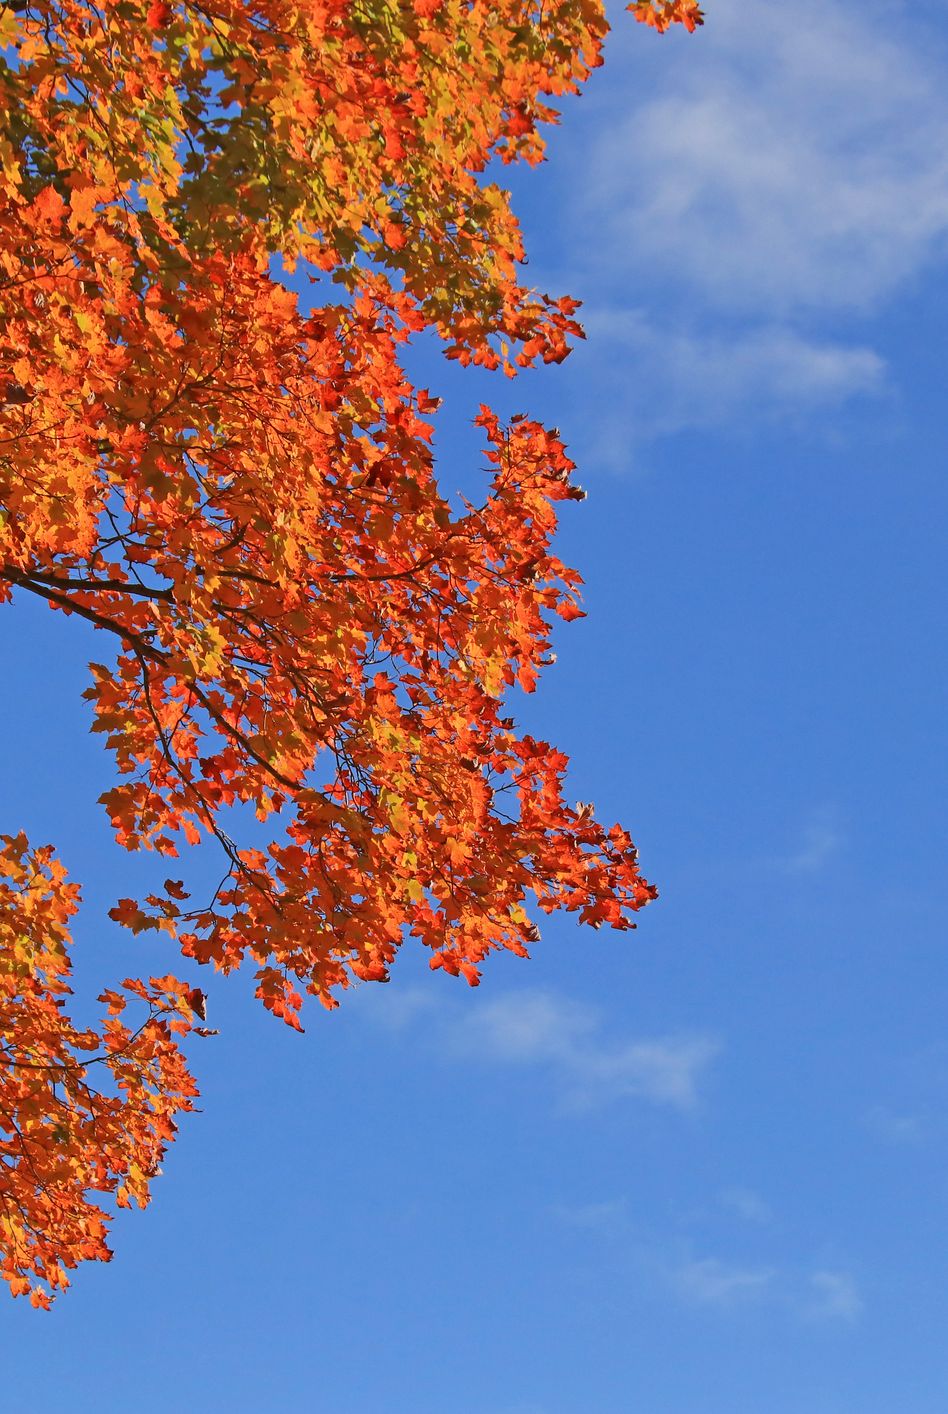 14 Best Autumn Poems - Classic Poems About Fall